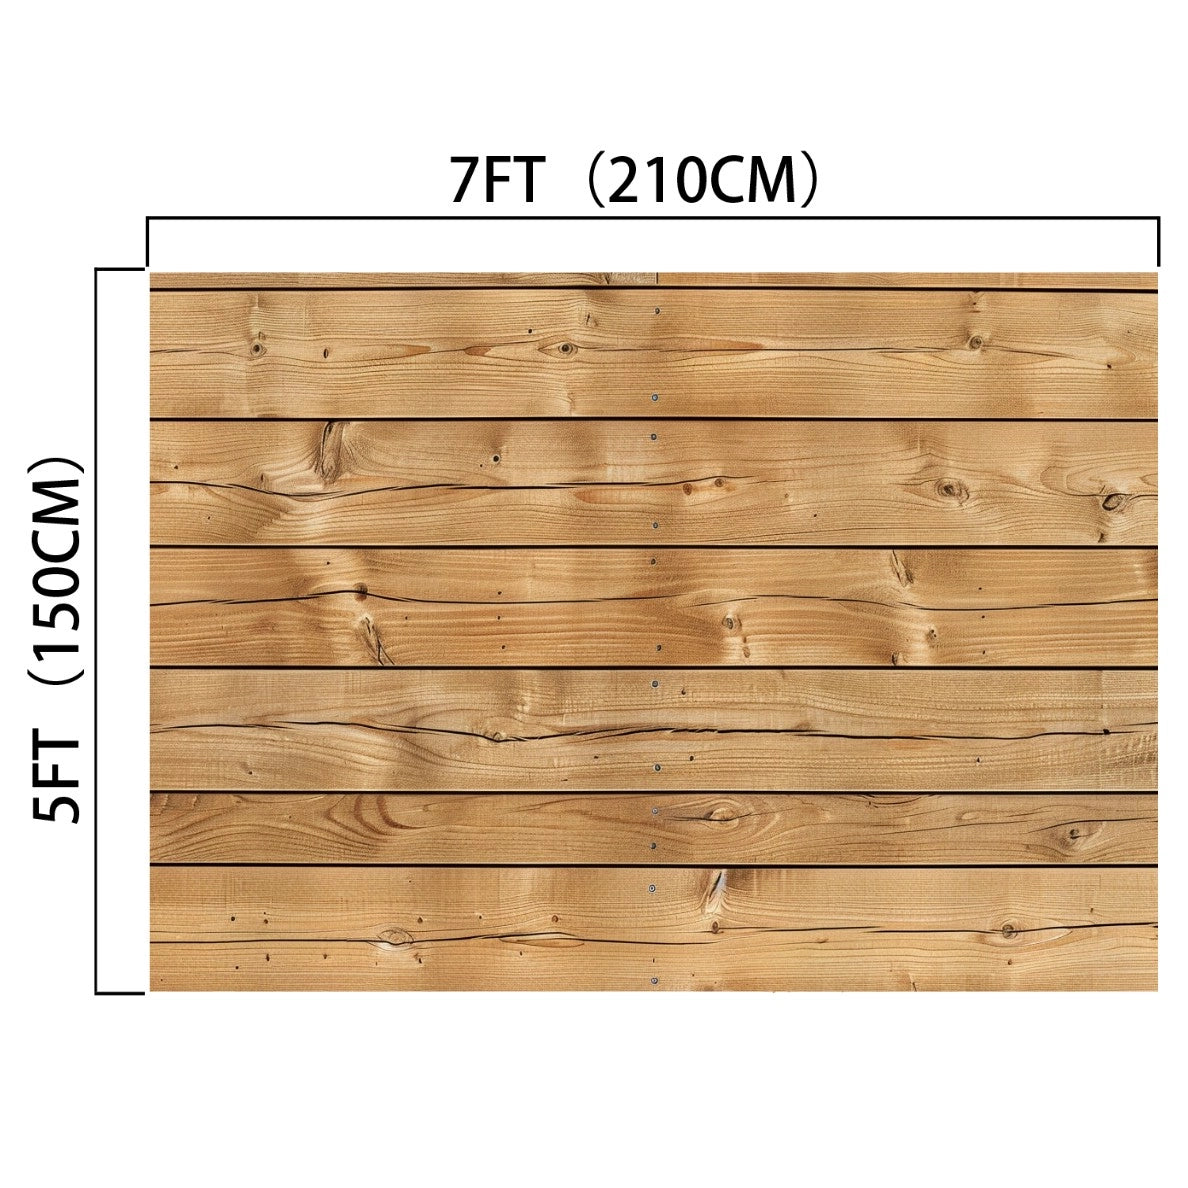 This 7x5ft Retro Wood Graduate Wall Background Wooden Backdrop Studio Props for Baby Shower Birthday Photography by ideasbackdrop, measuring 7 feet (210 cm) in length and 5 feet (150 cm) in height, is crafted from several horizontal planks.